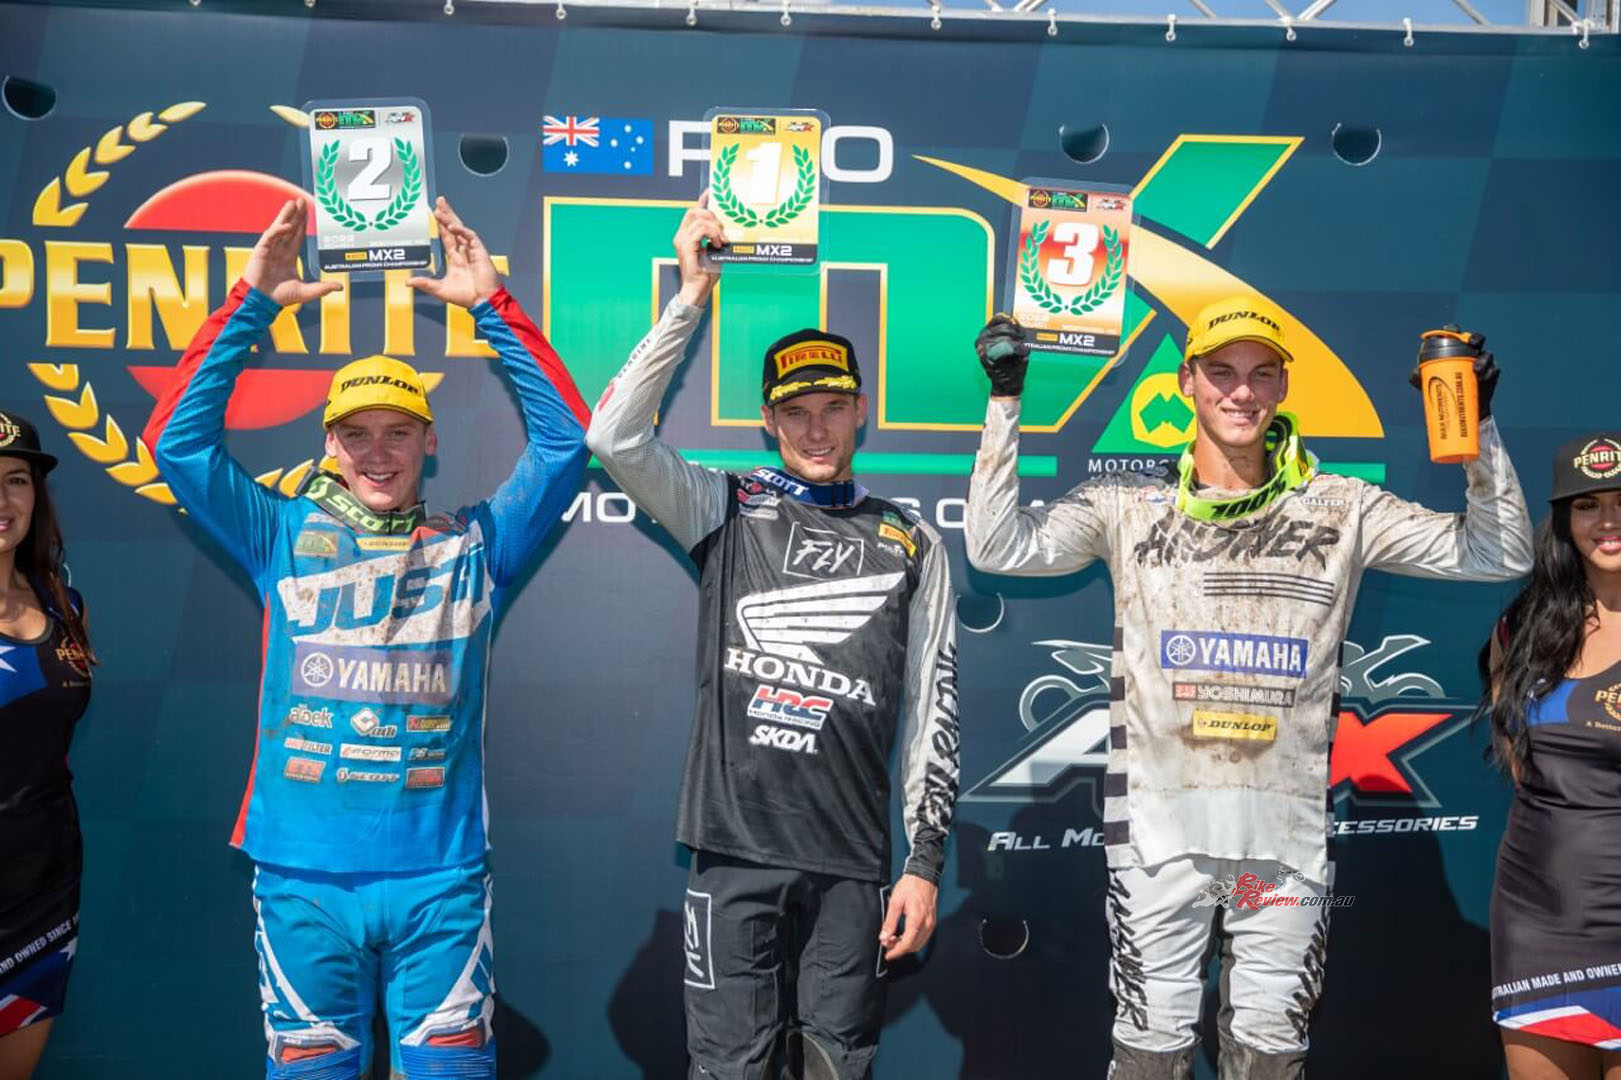 Overall, a very successful opening round of the ProMX for Yamaha as a whole...